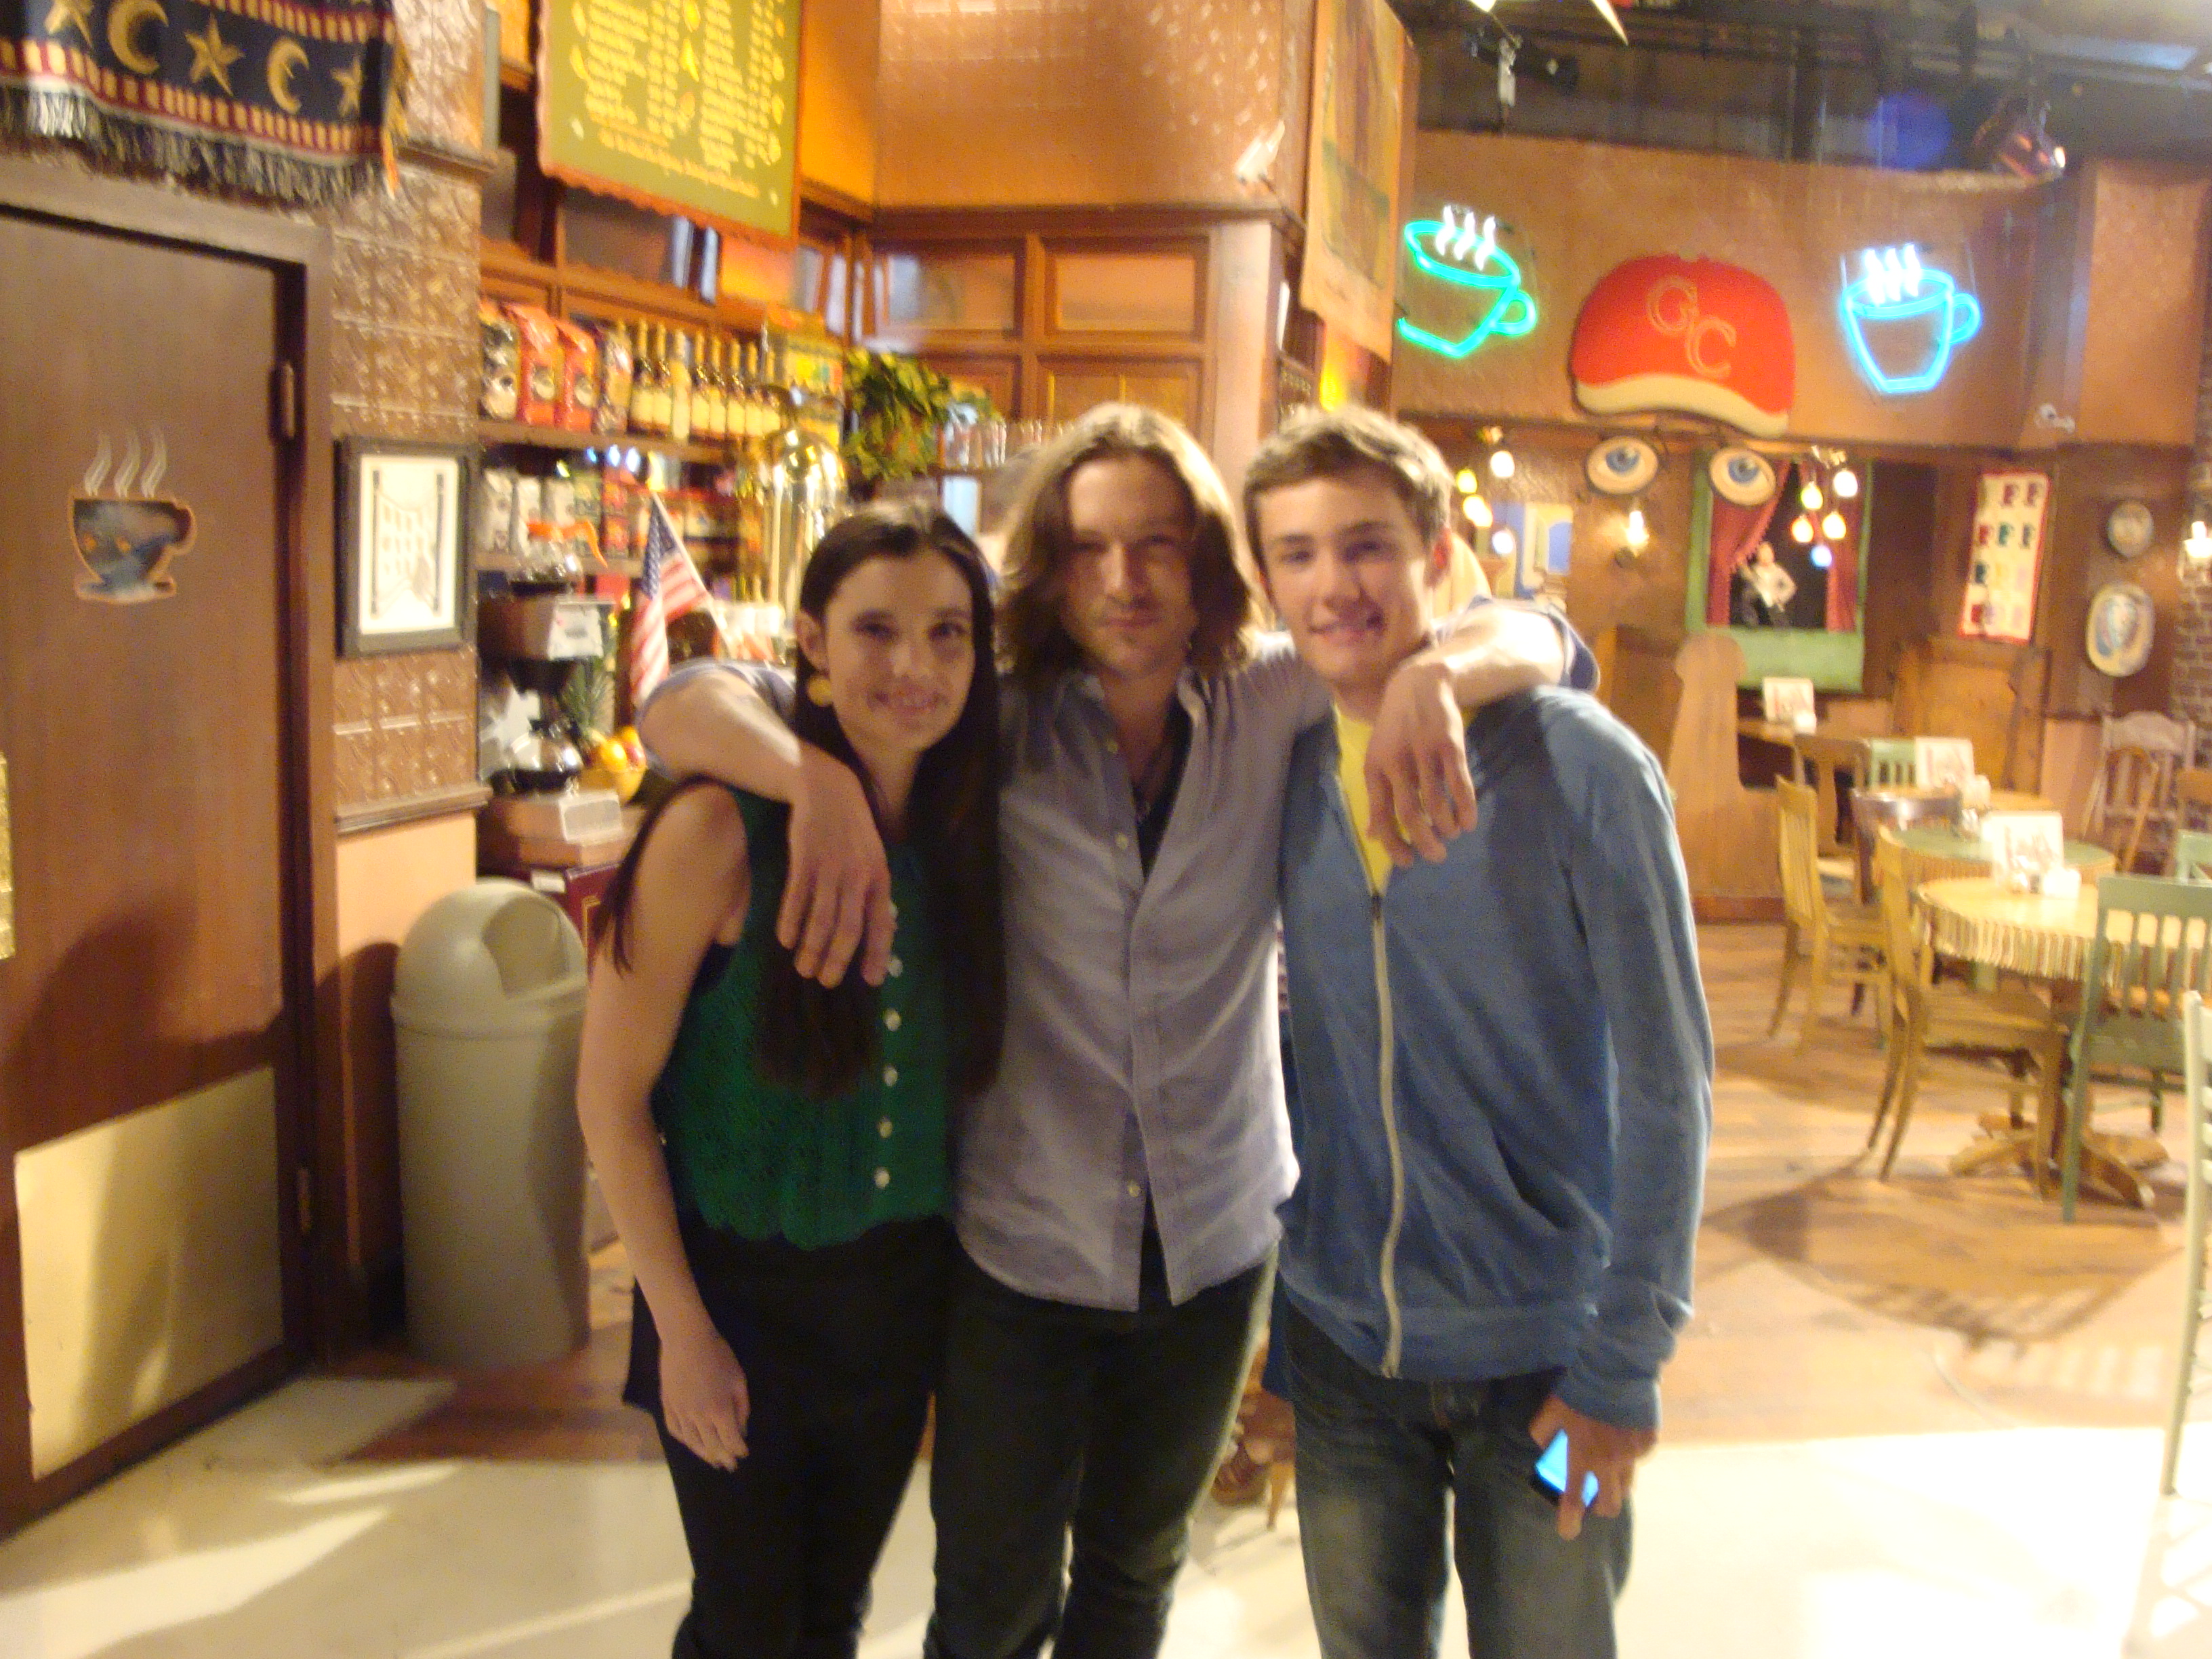 Randy Shelly, Michael Graziadei and Vanessa Marano on the set of The Young and the Restless 2012